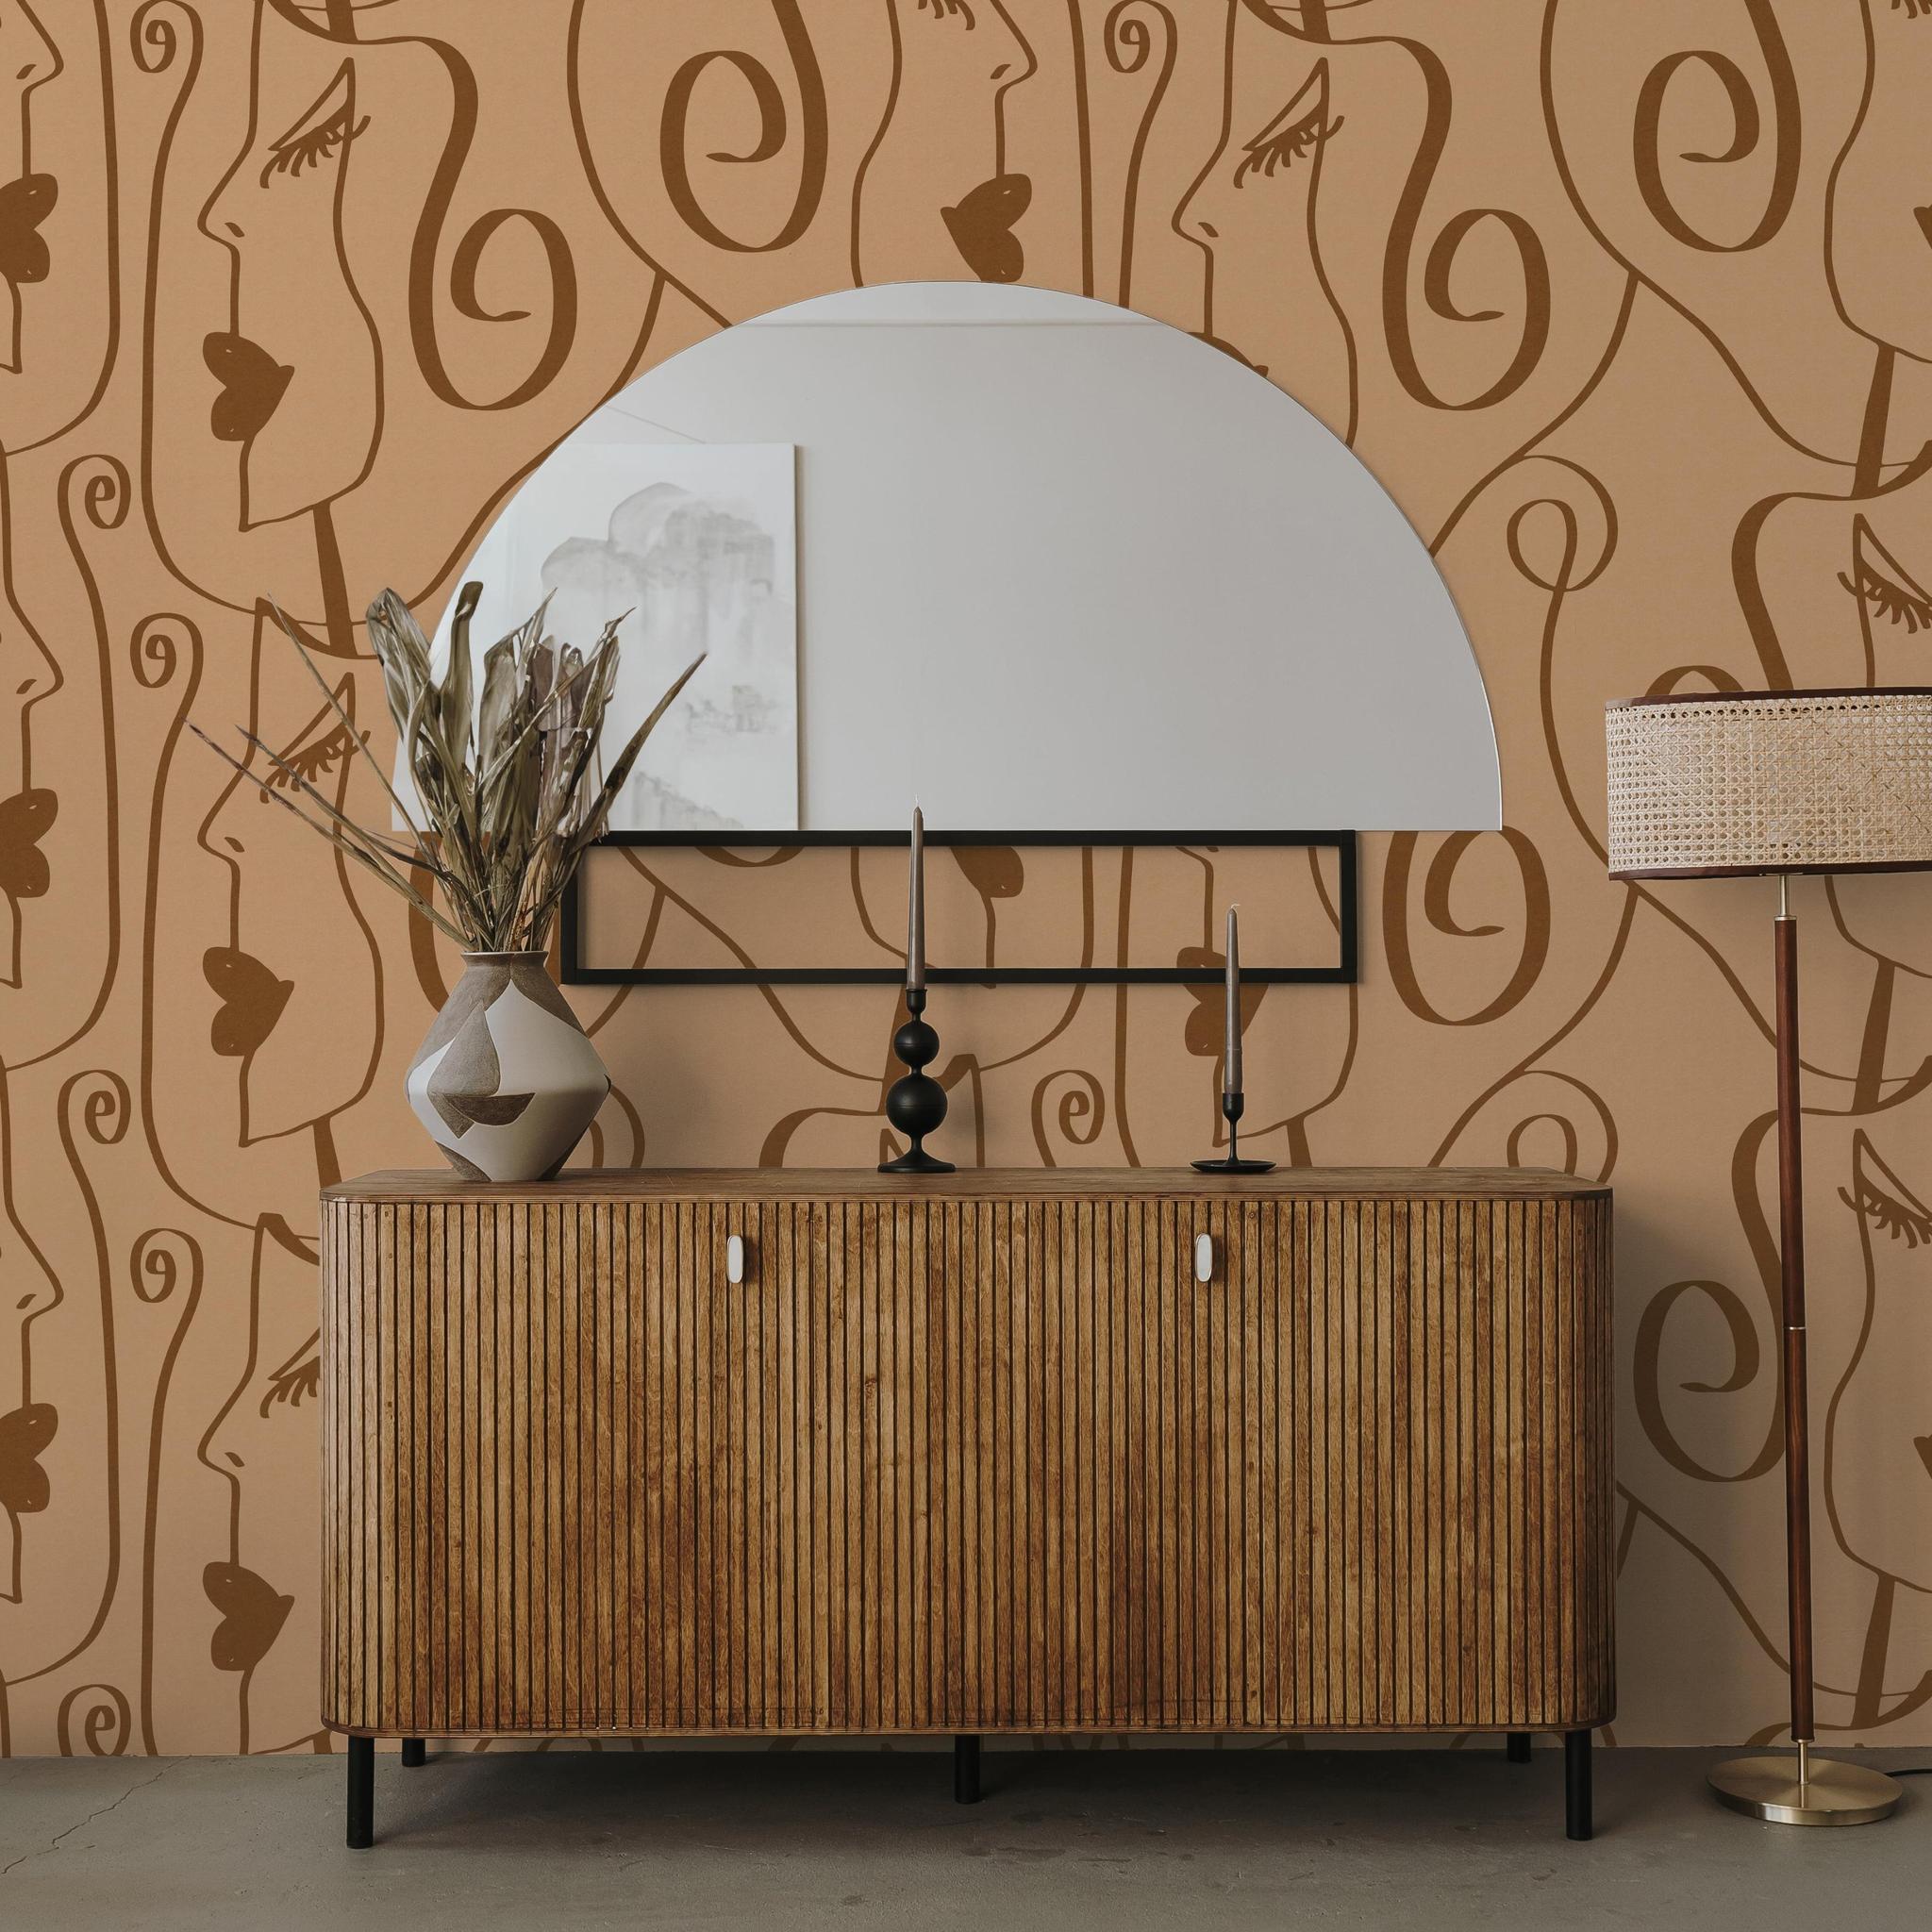 Tess Wallpaper by Wall Blush SG02 in a stylish living room with face patterns and modern decor.
